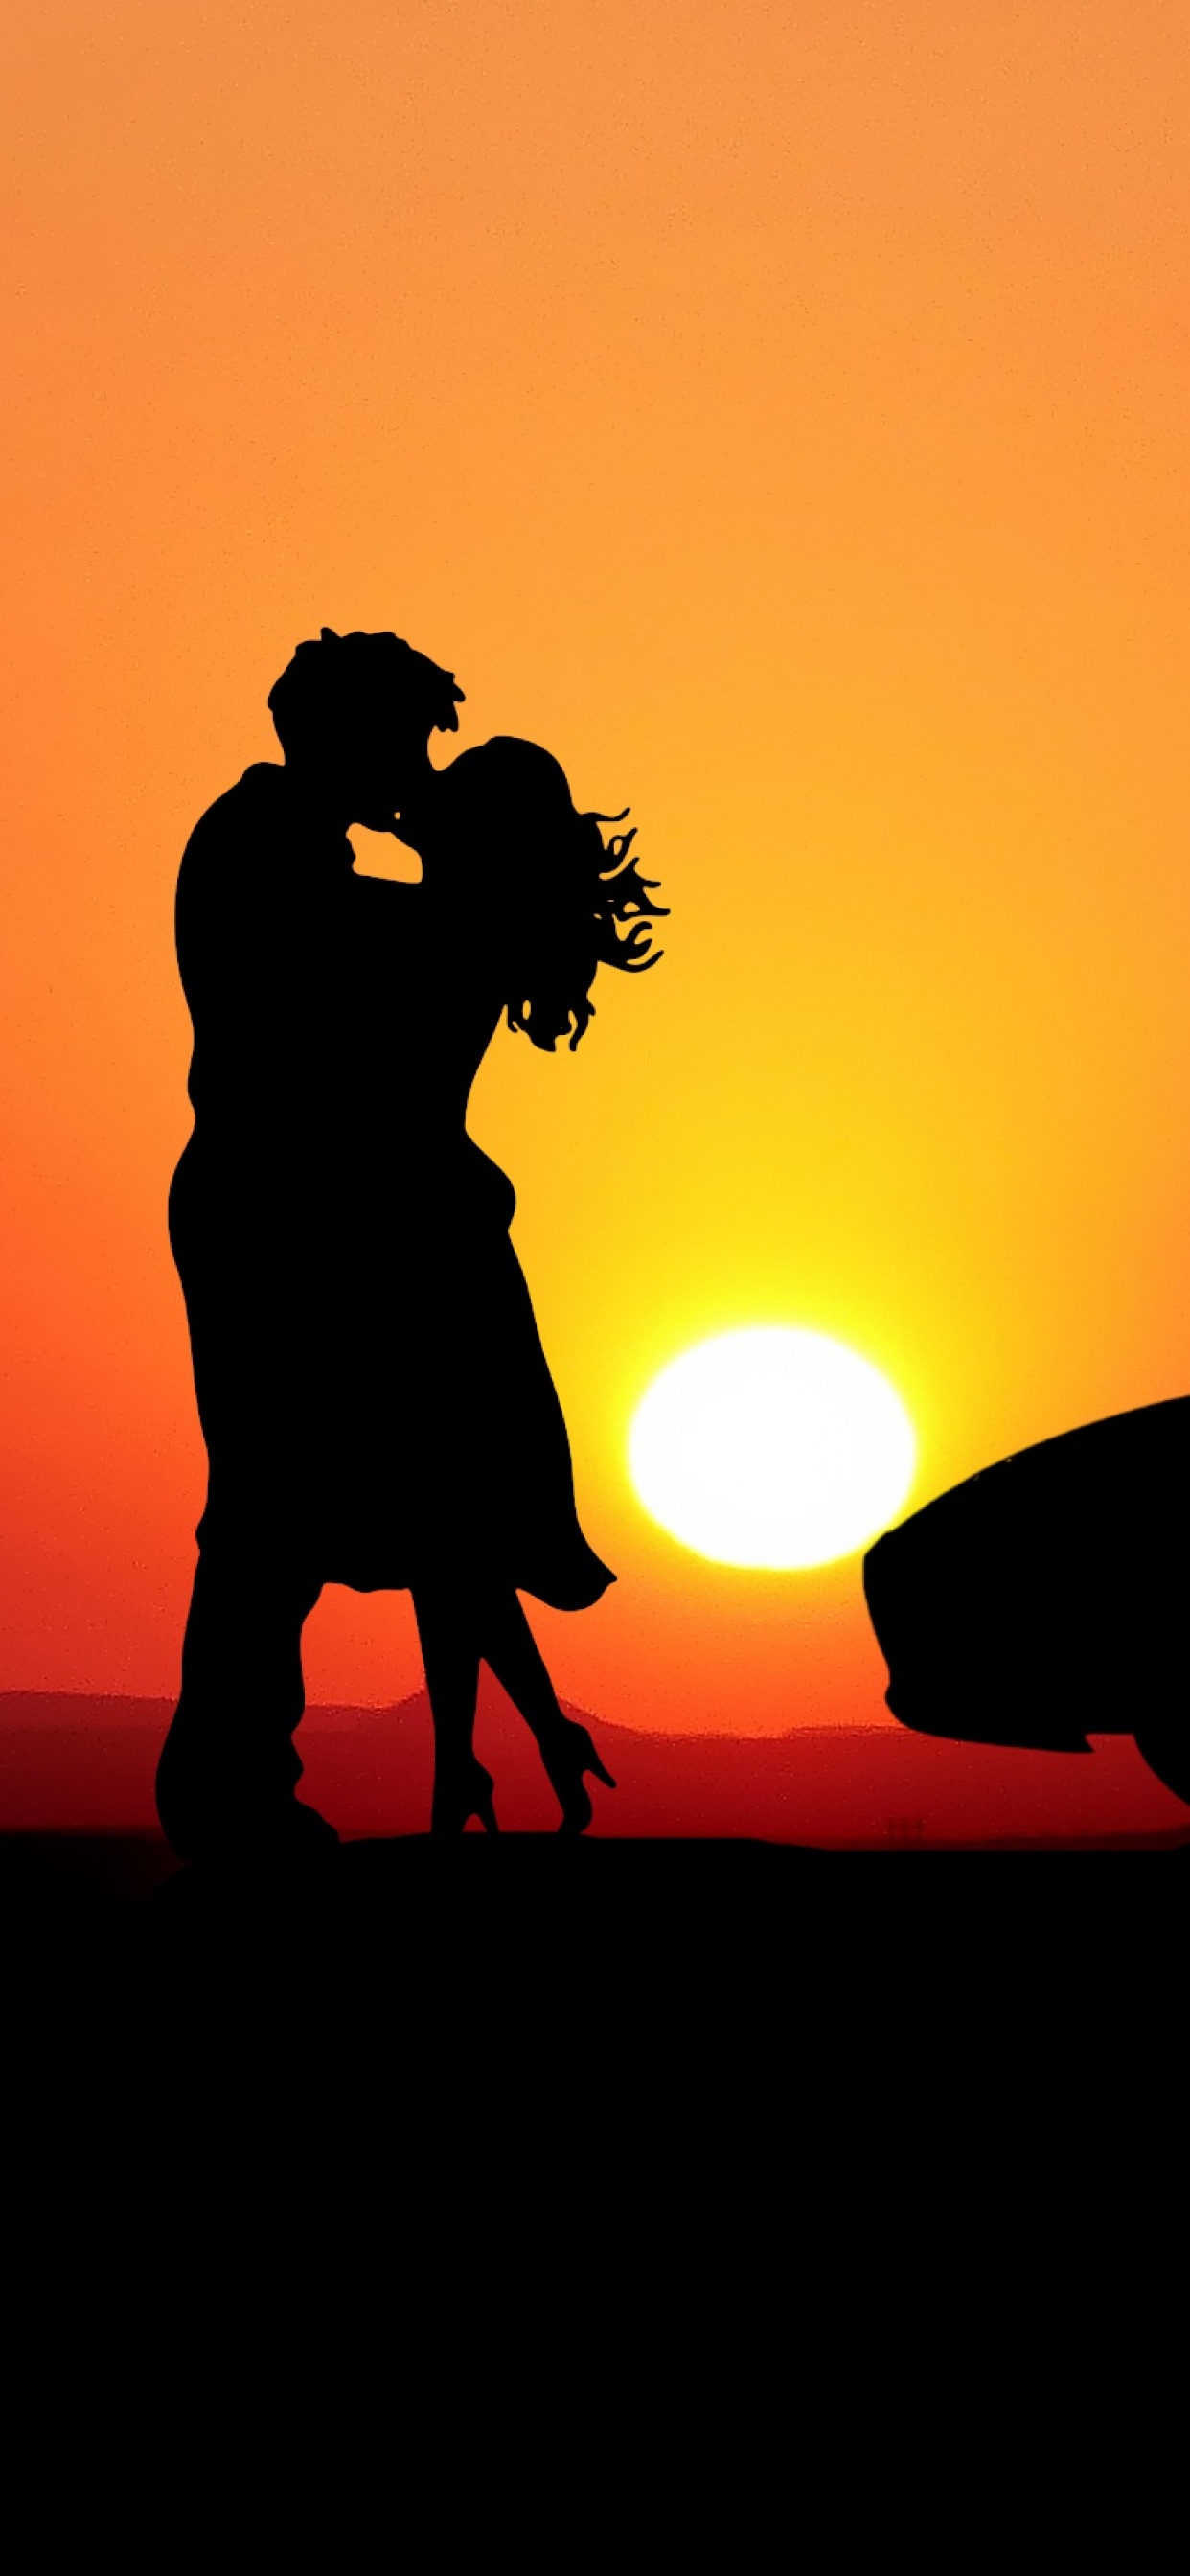 Couple Wallpaper 4K, Romantic kiss, Sunset, Silhouette, Car, Together